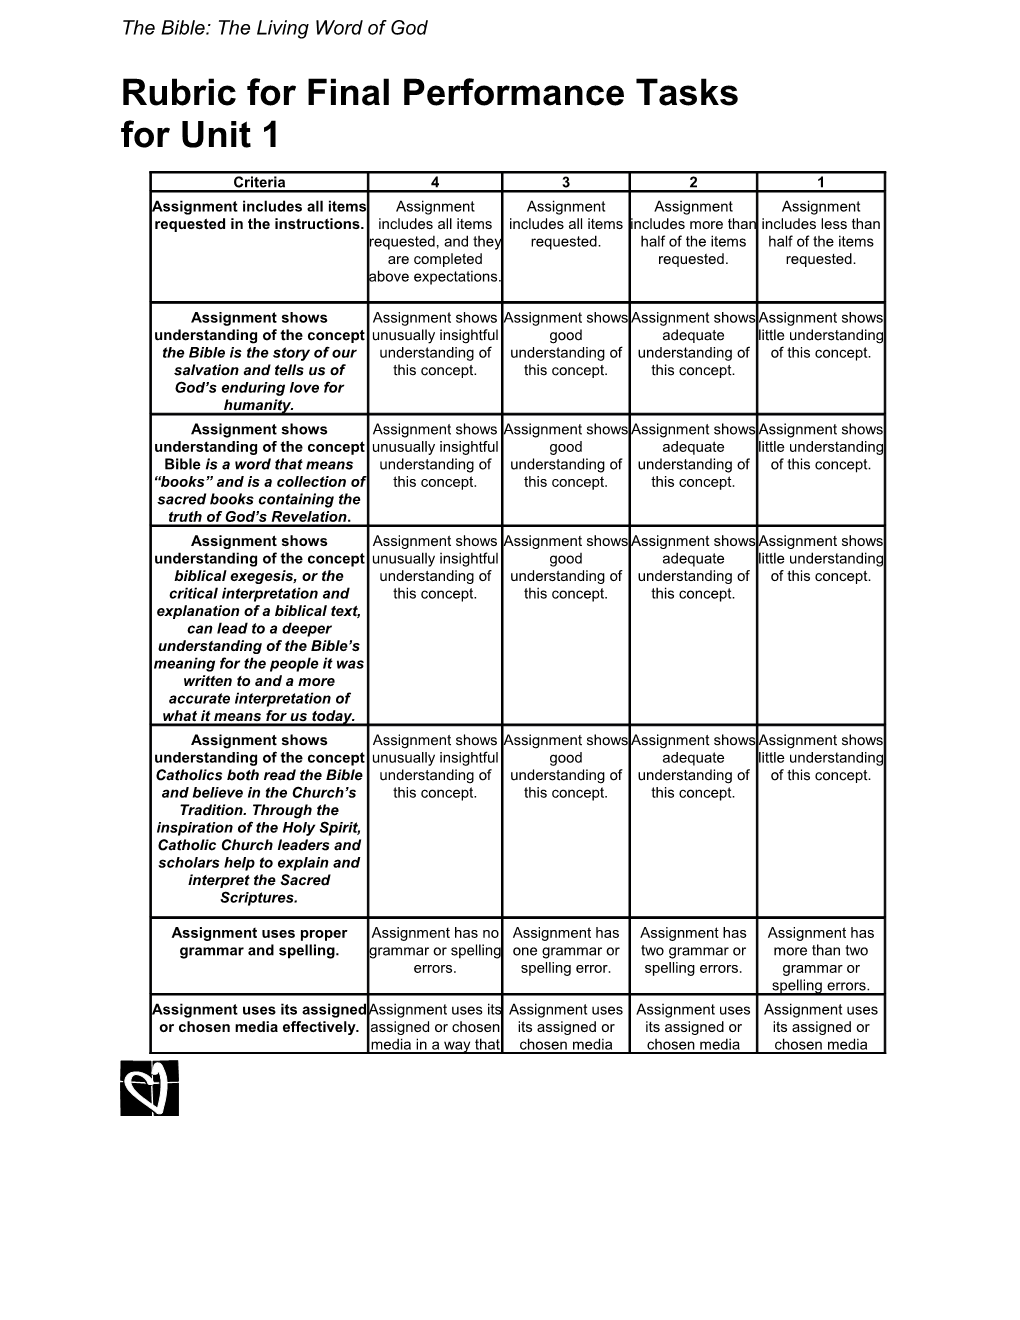 Rubric for Final Performance Tasks for Unit 1Page 1